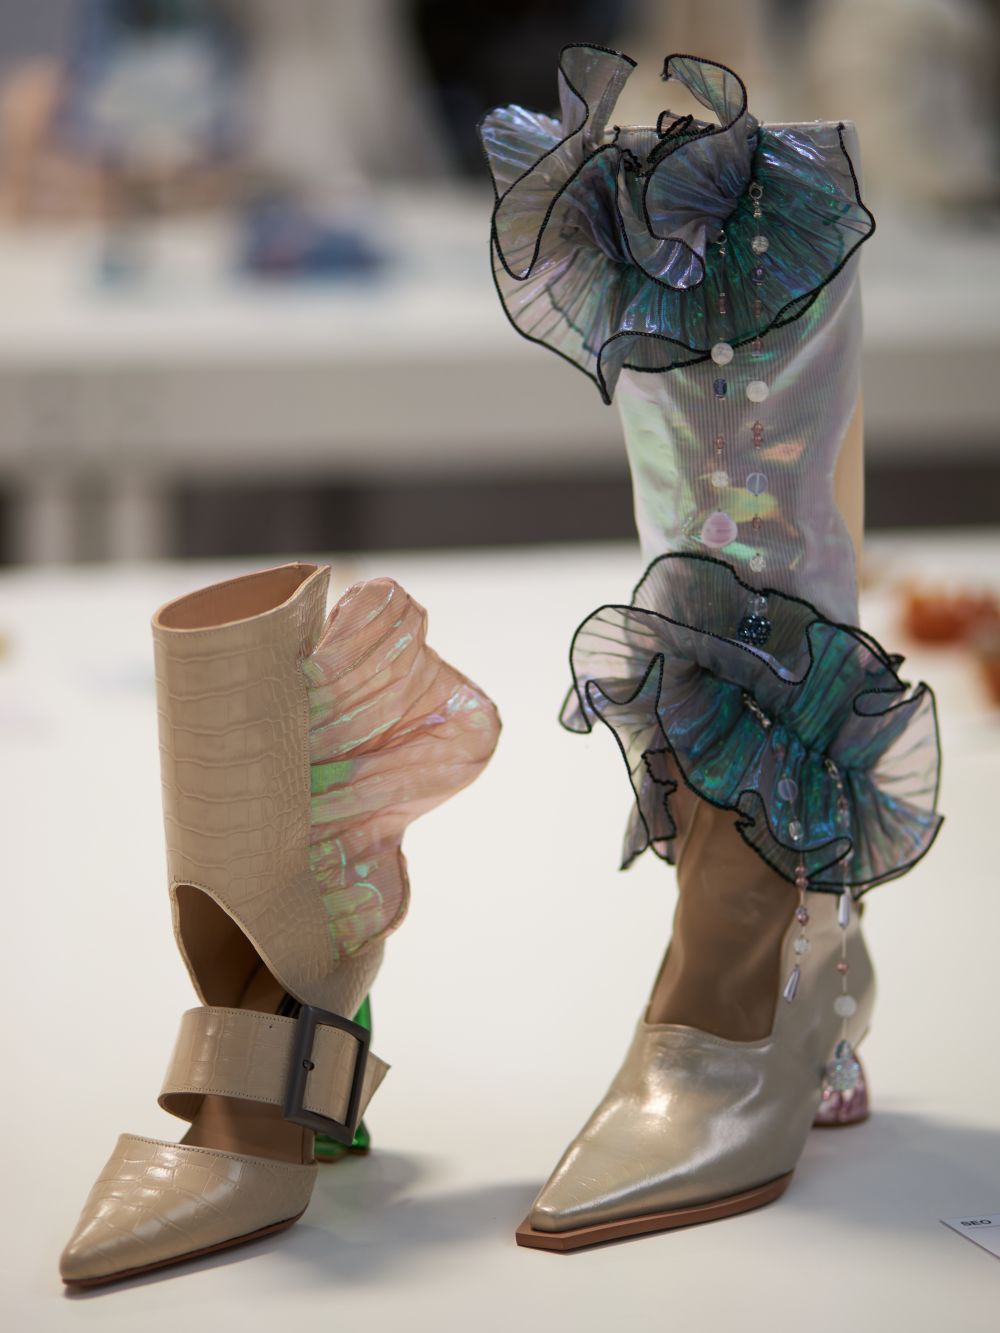 Two footwear items, left a shorter beige and pearl colour, the right a taller boot with blue frills